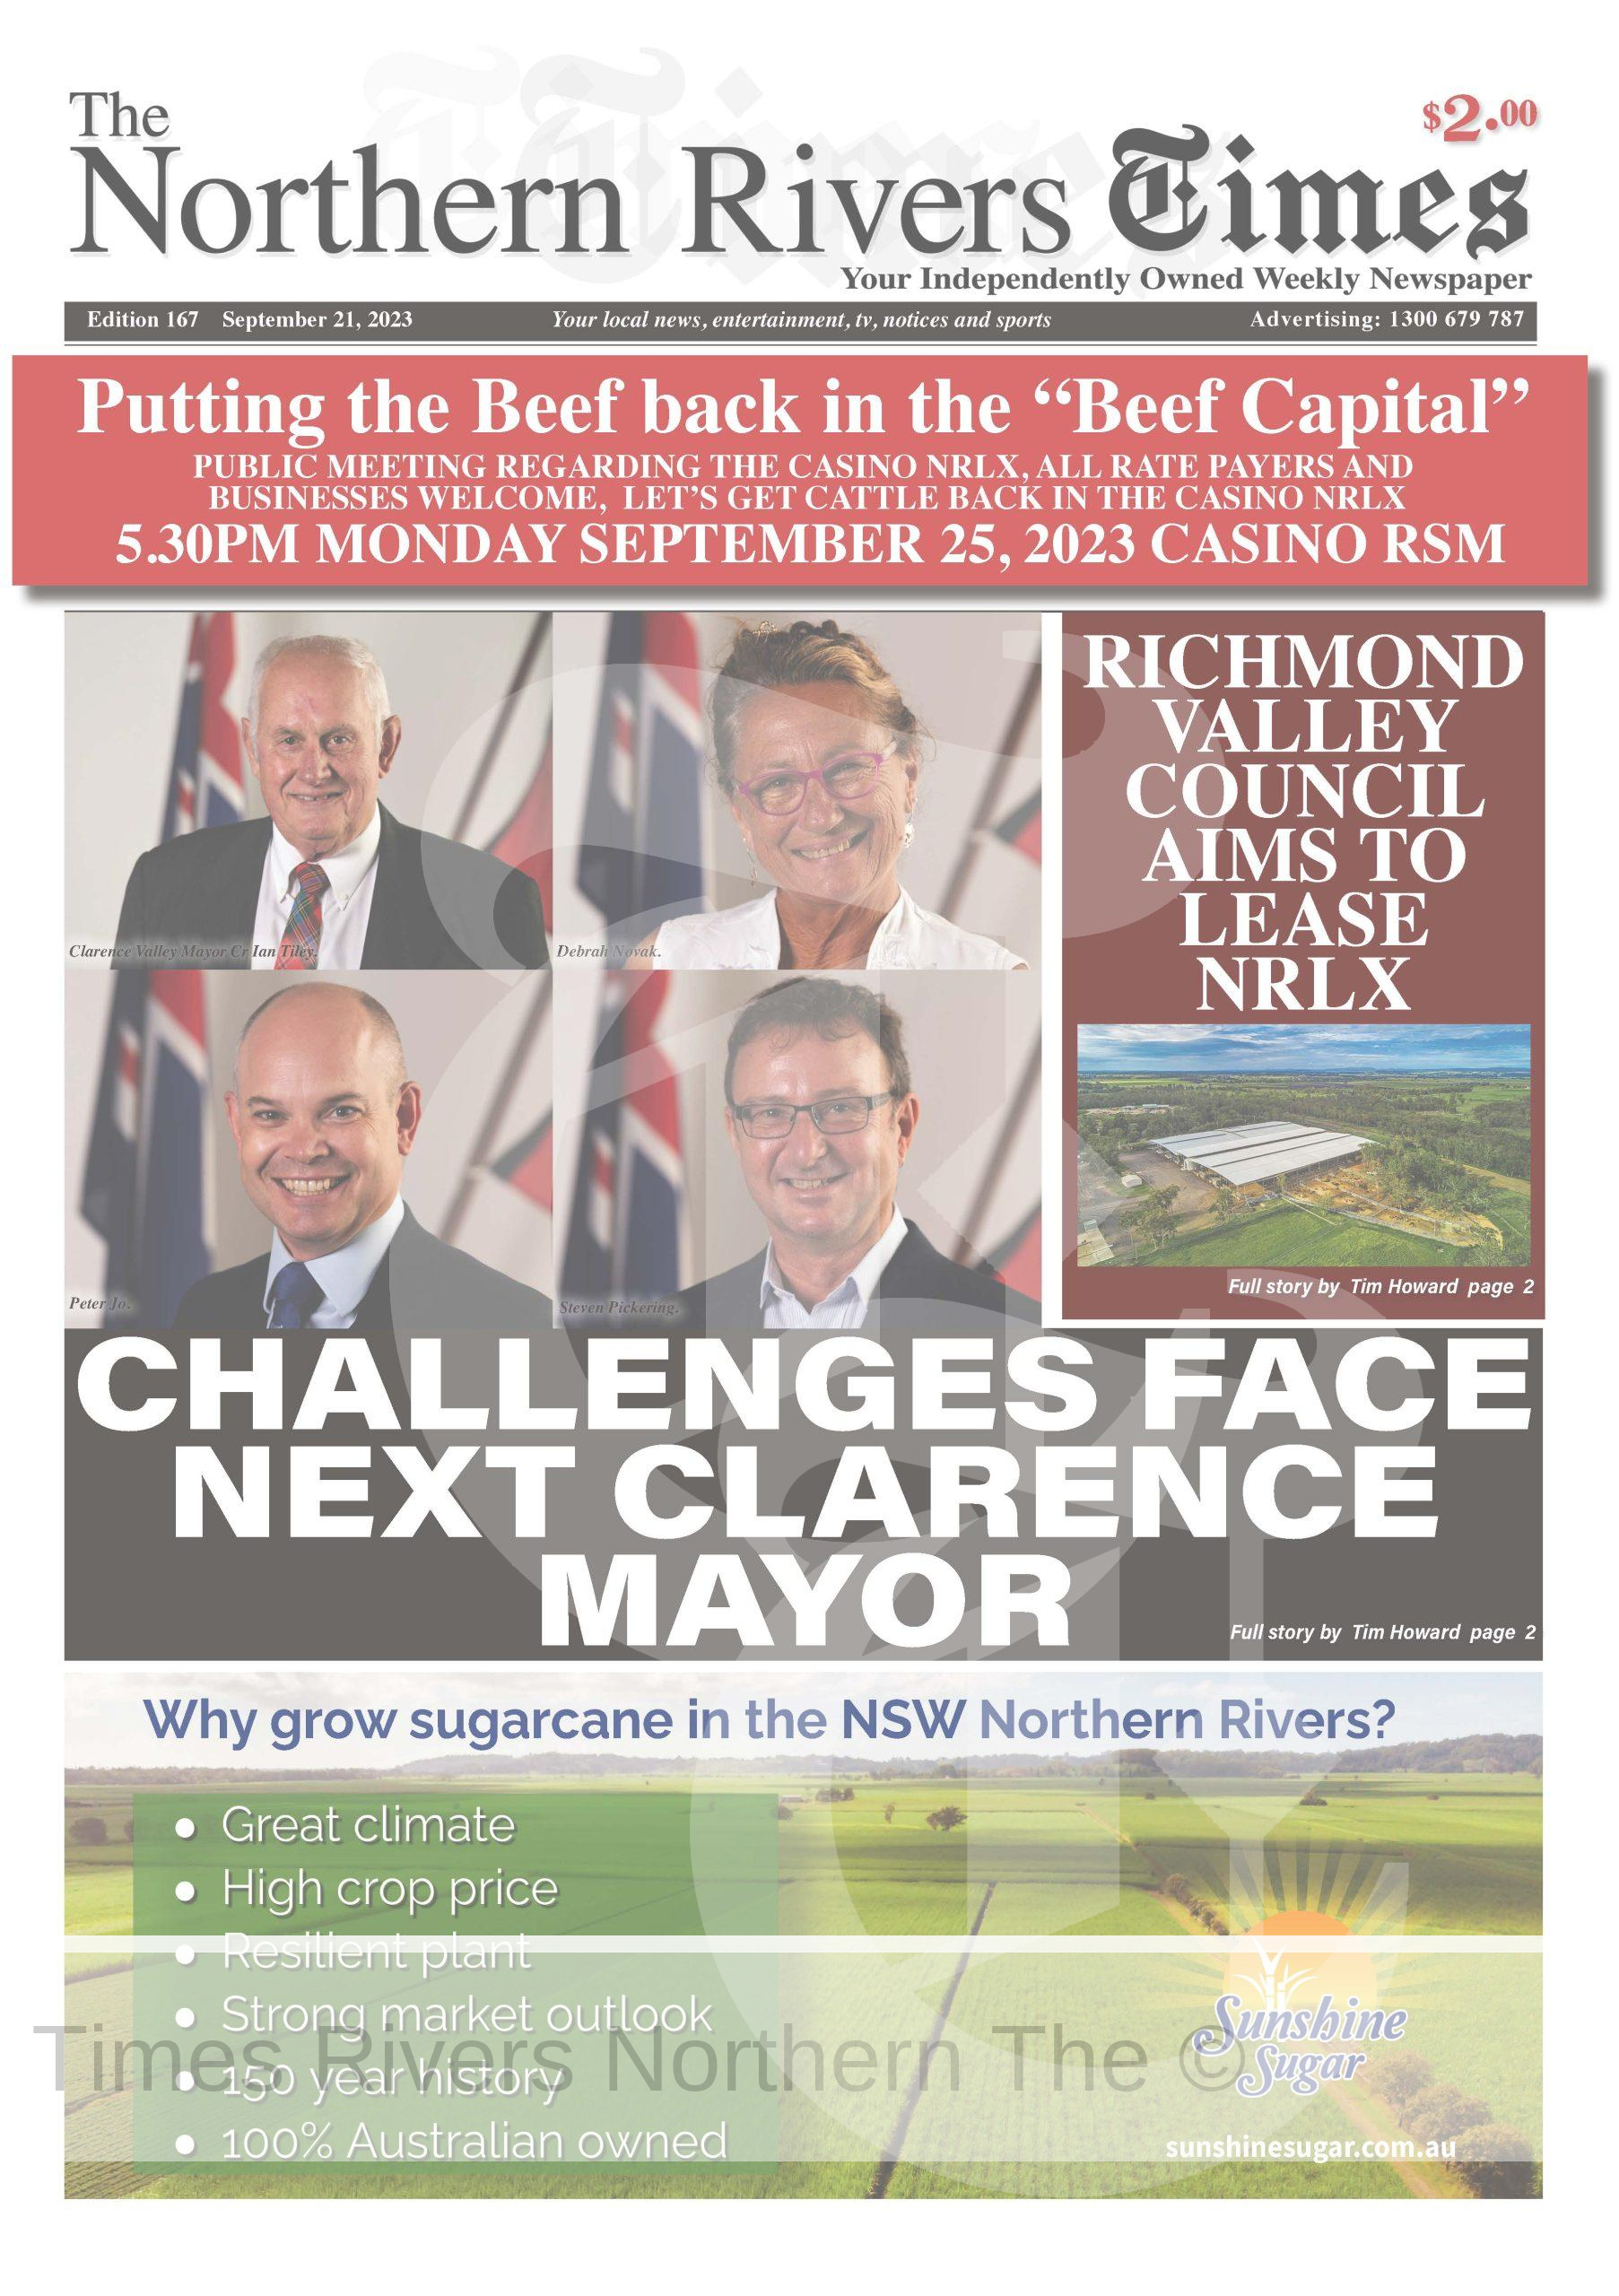 The Northern Rivers Times Edition 167